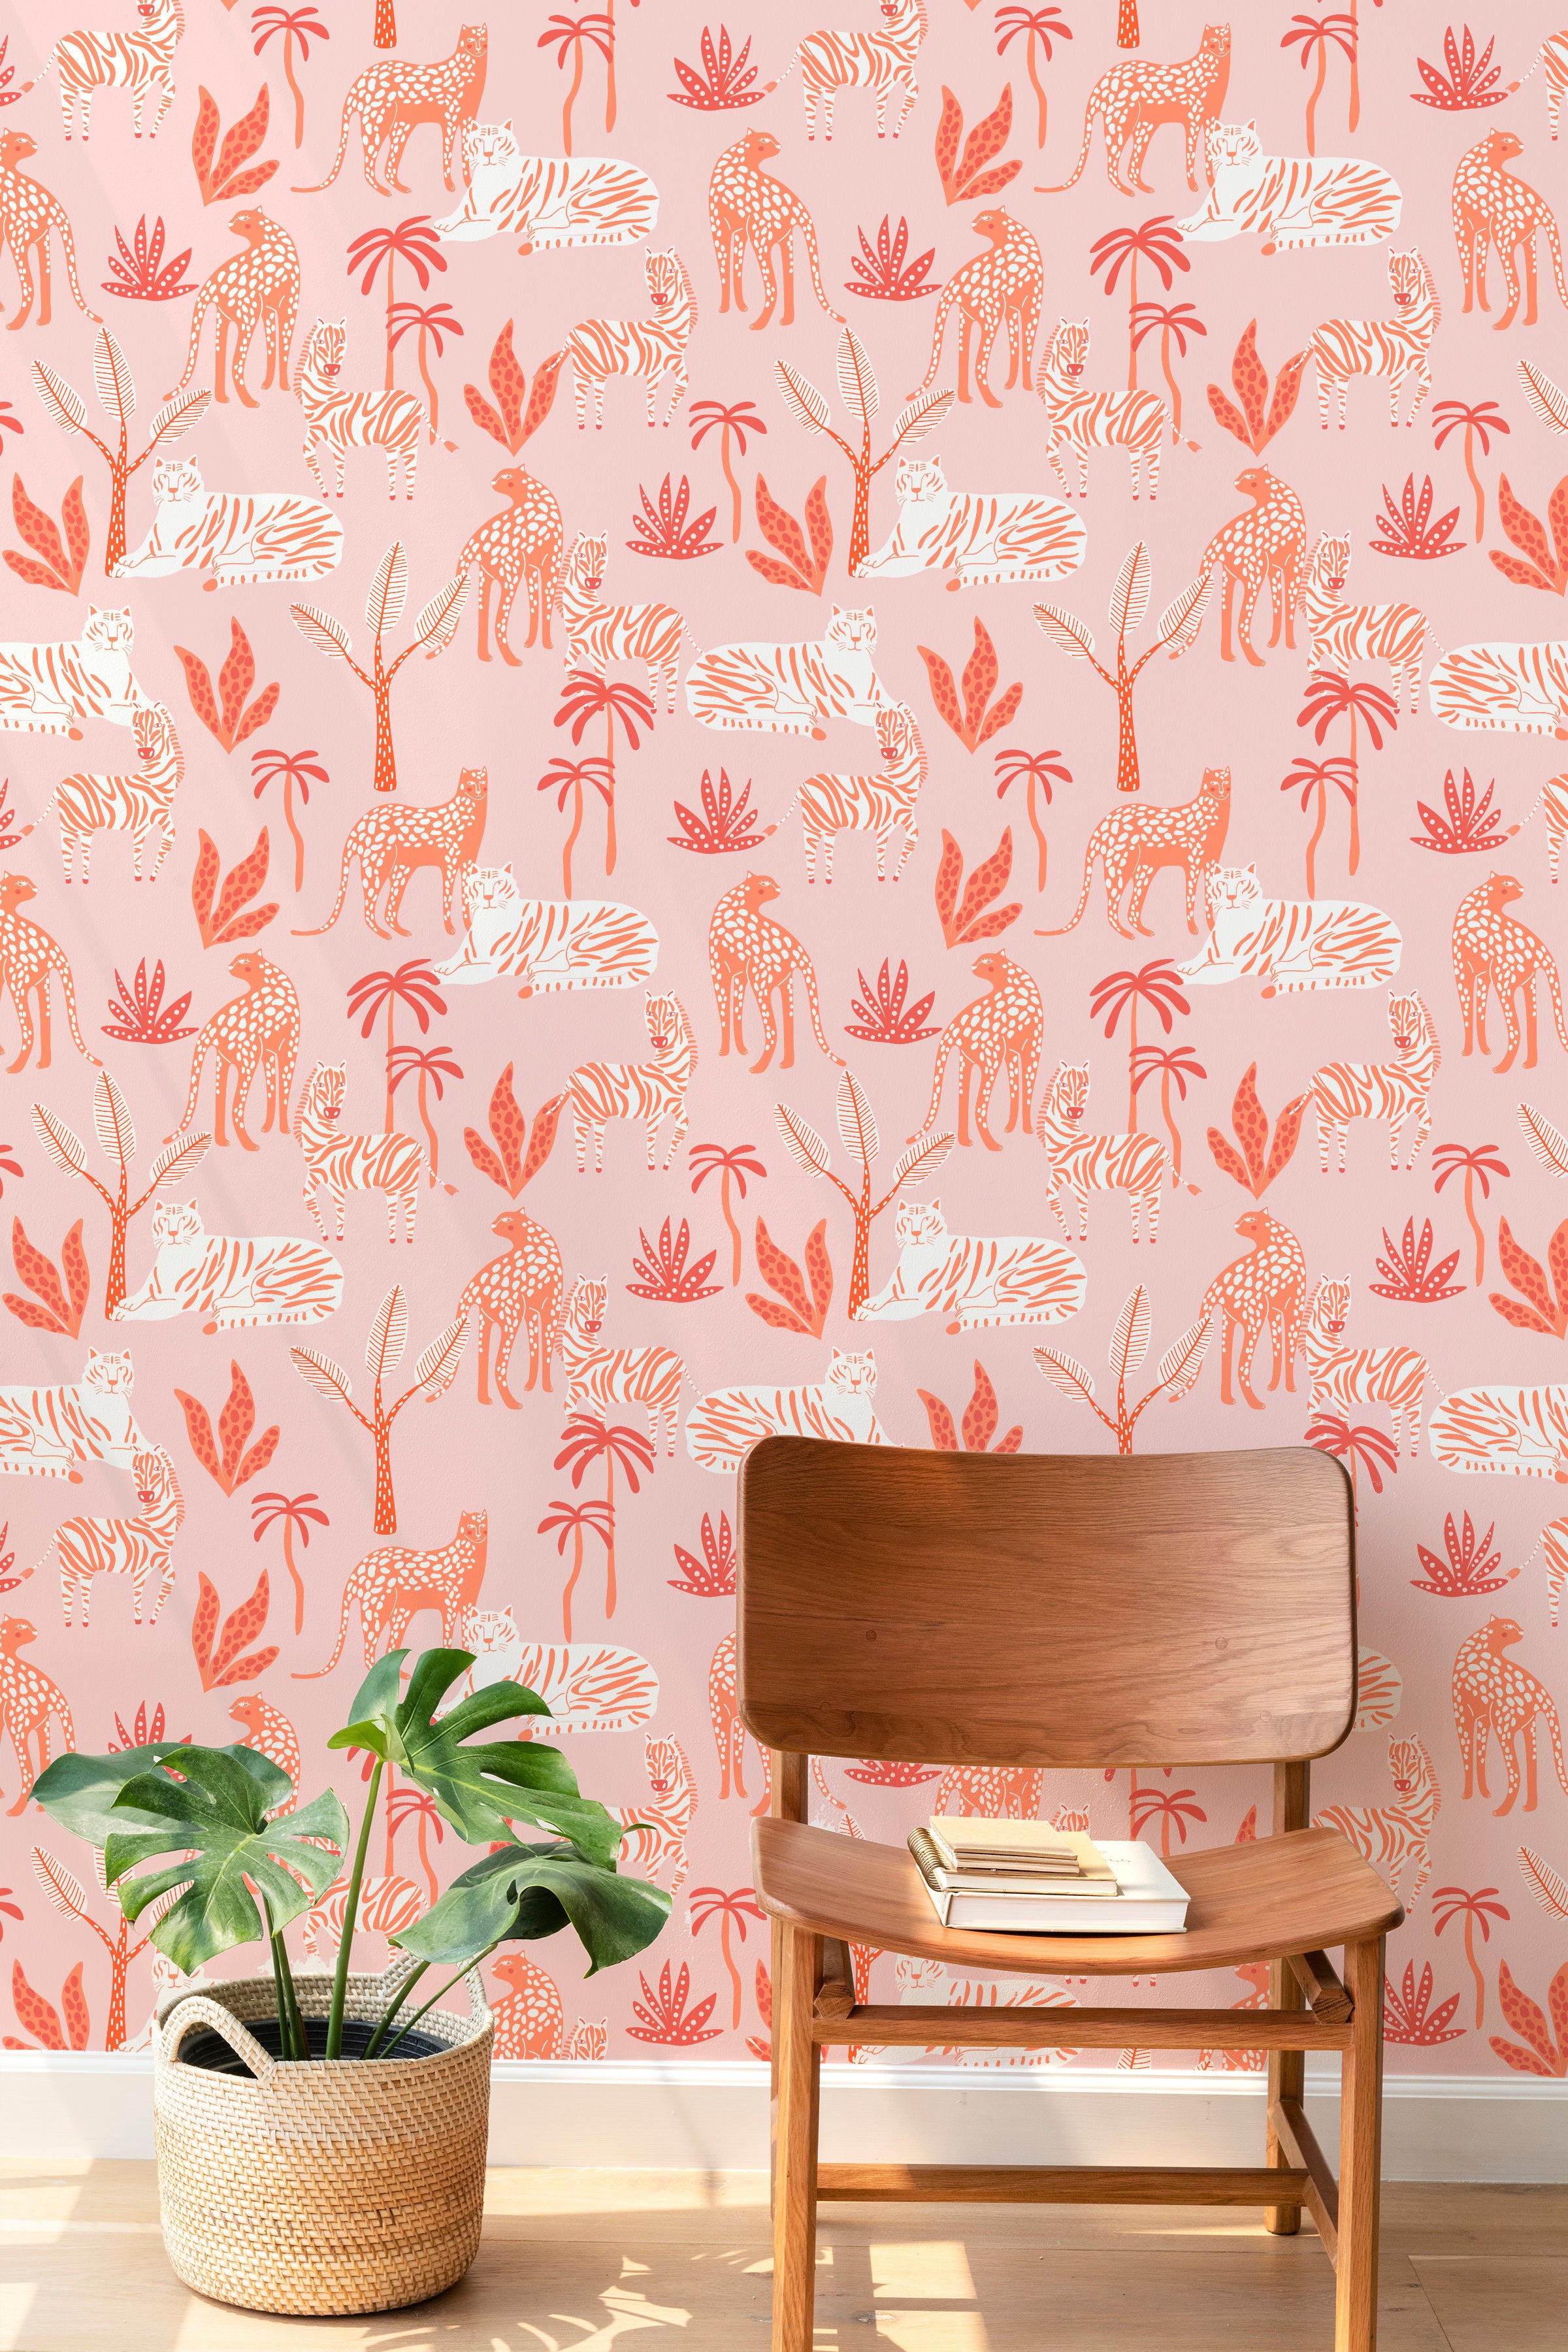 A cozy reading nook decorated with Sunset Safari wallpaper, featuring colorful illustrations of safari animals and tropical plants in shades of orange, coral, and white on a pink background. The space includes a wooden chair and a potted plant.